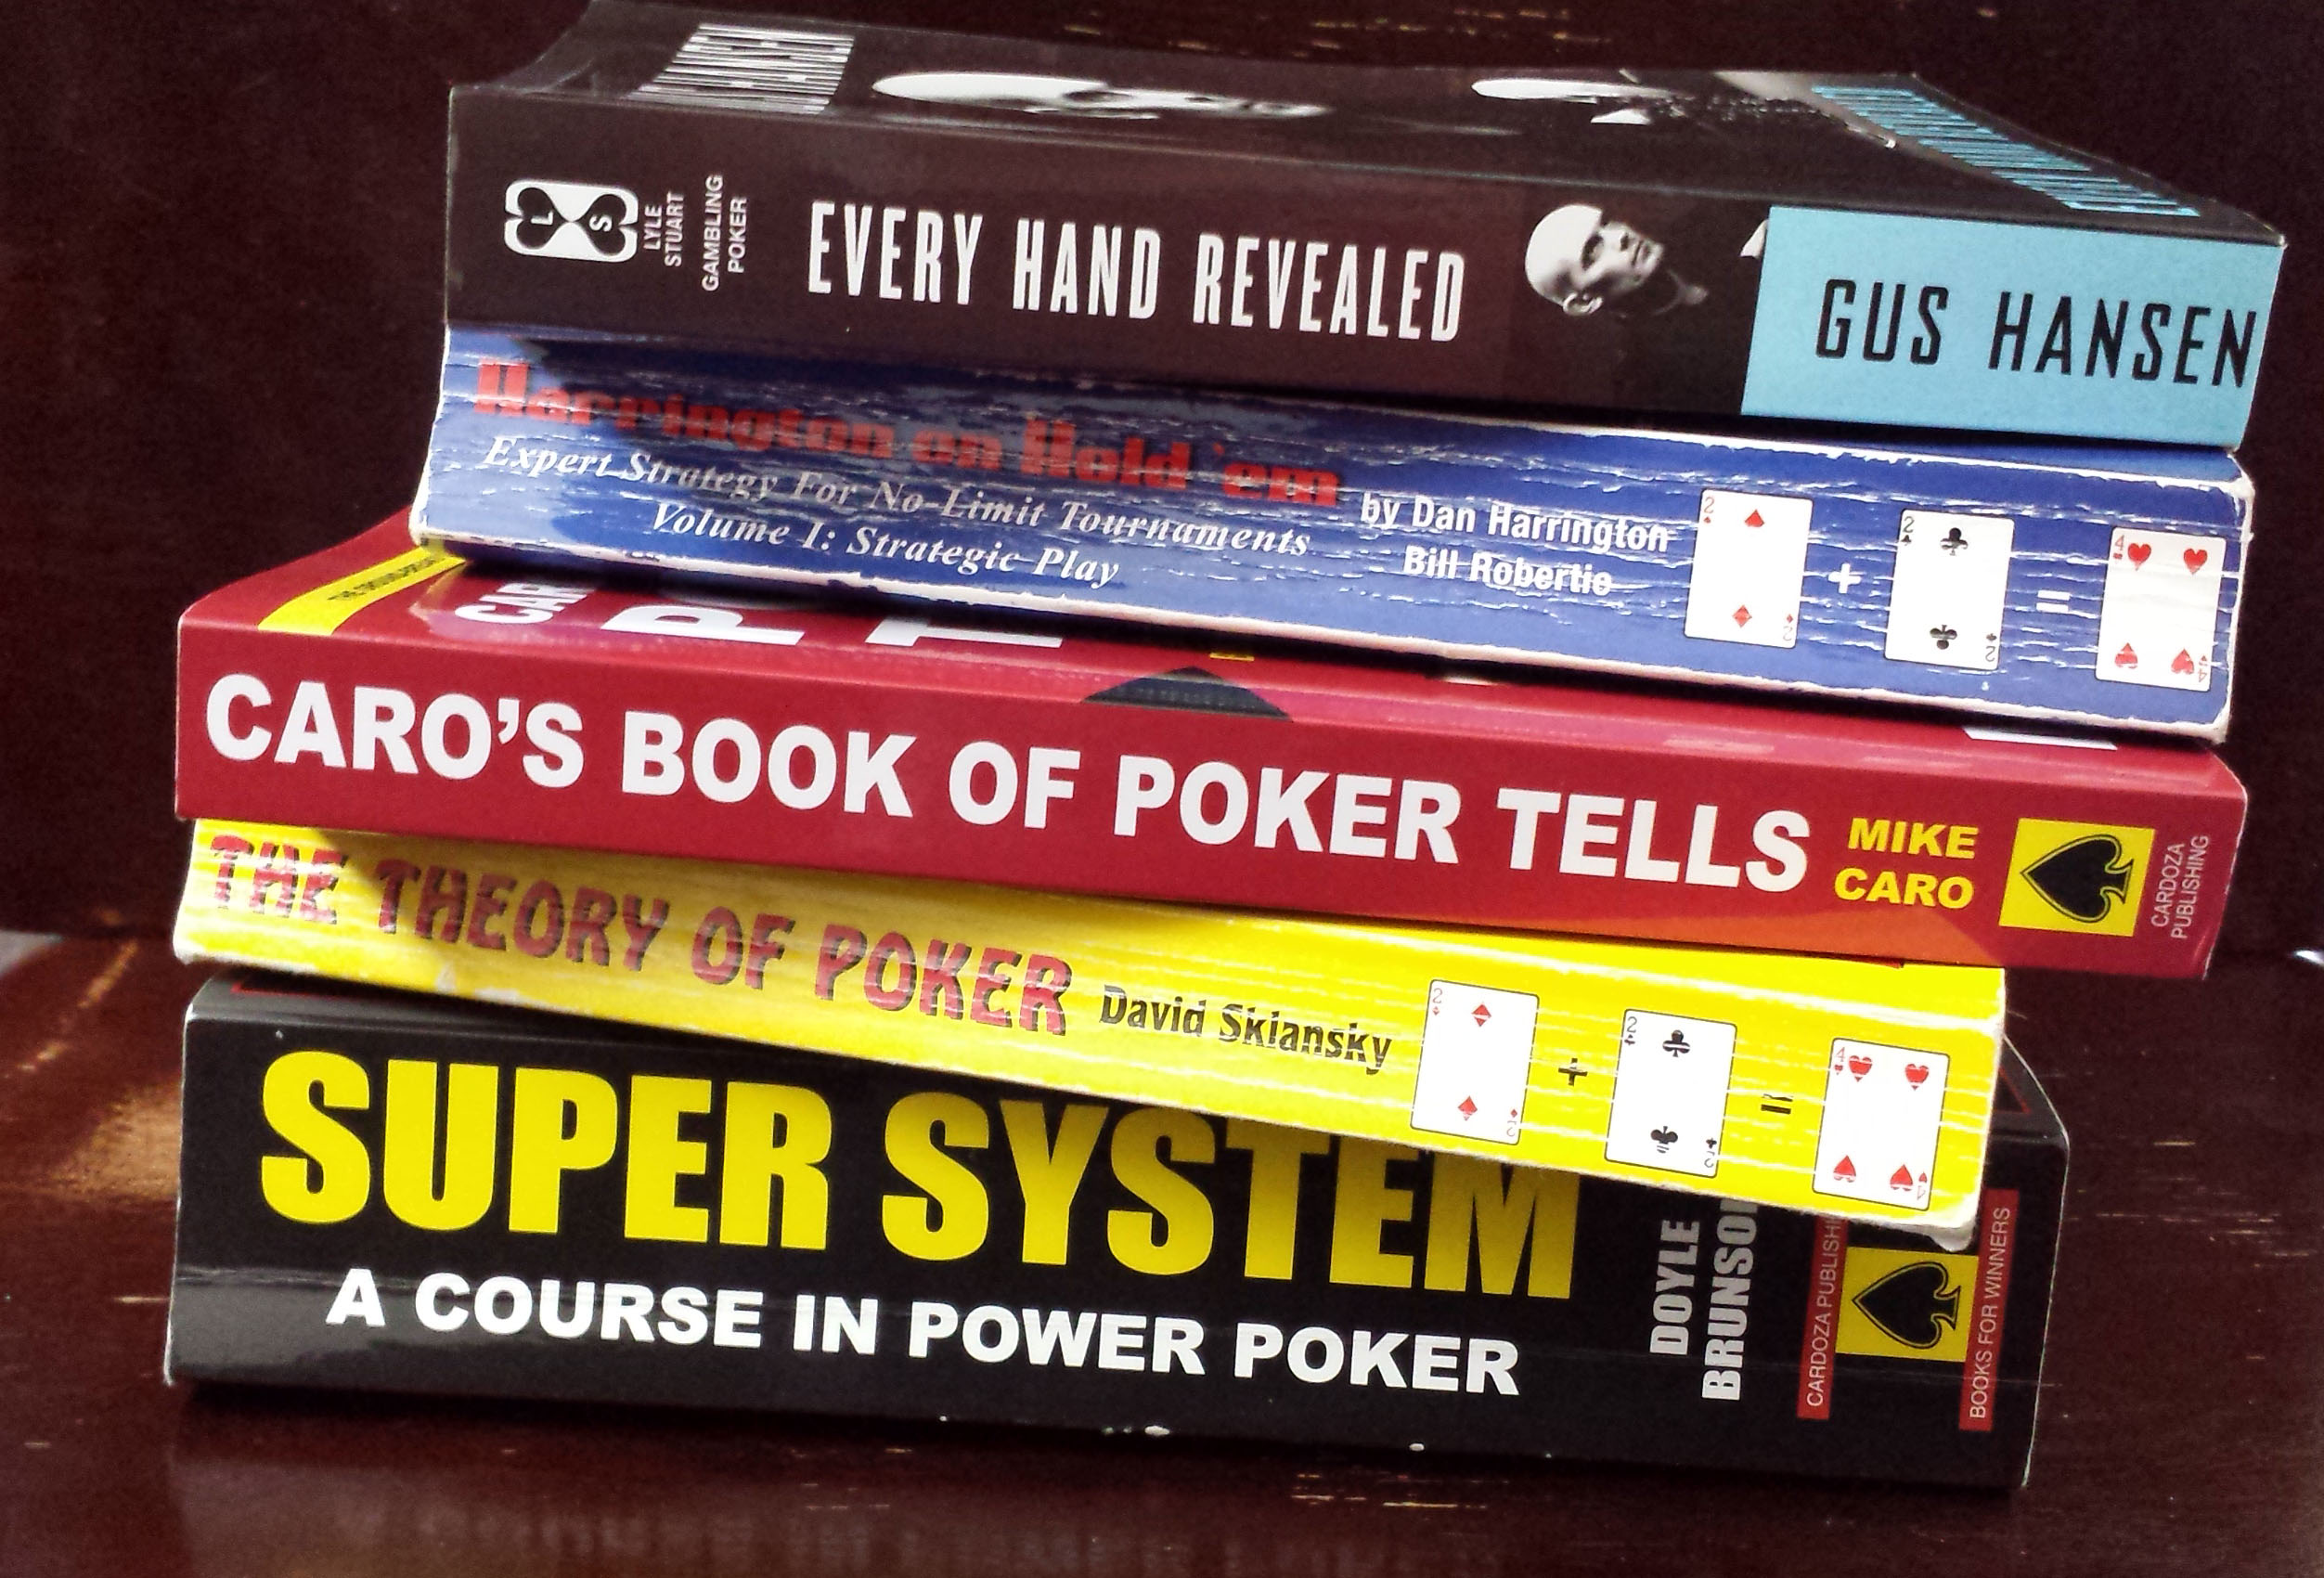 Know When To Hold & Fold: The Five Best Books Written By Pro Gamblers